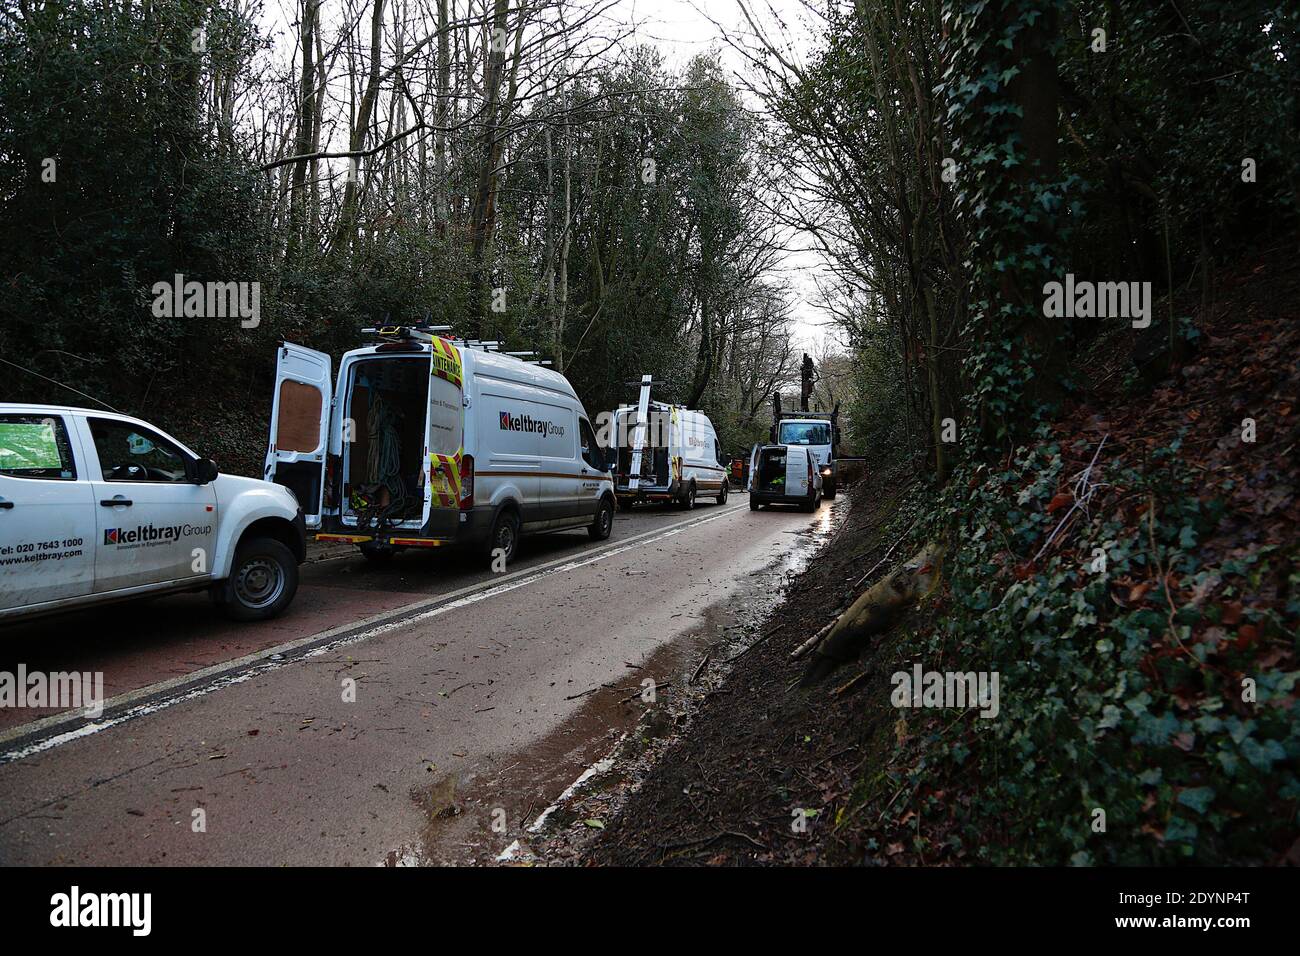 Hastings, East Sussex, UK. 27 Dec, 2020. UK Weather: The A21 from Hastings to Sedlescombe is blocked off by the police as storm Bella has blown down trees along the route. Trees have taken Power line down, according workmen they have several hours left to clear the road. Photo Credit: Paul Lawrenson/Alamy Live News Stock Photo